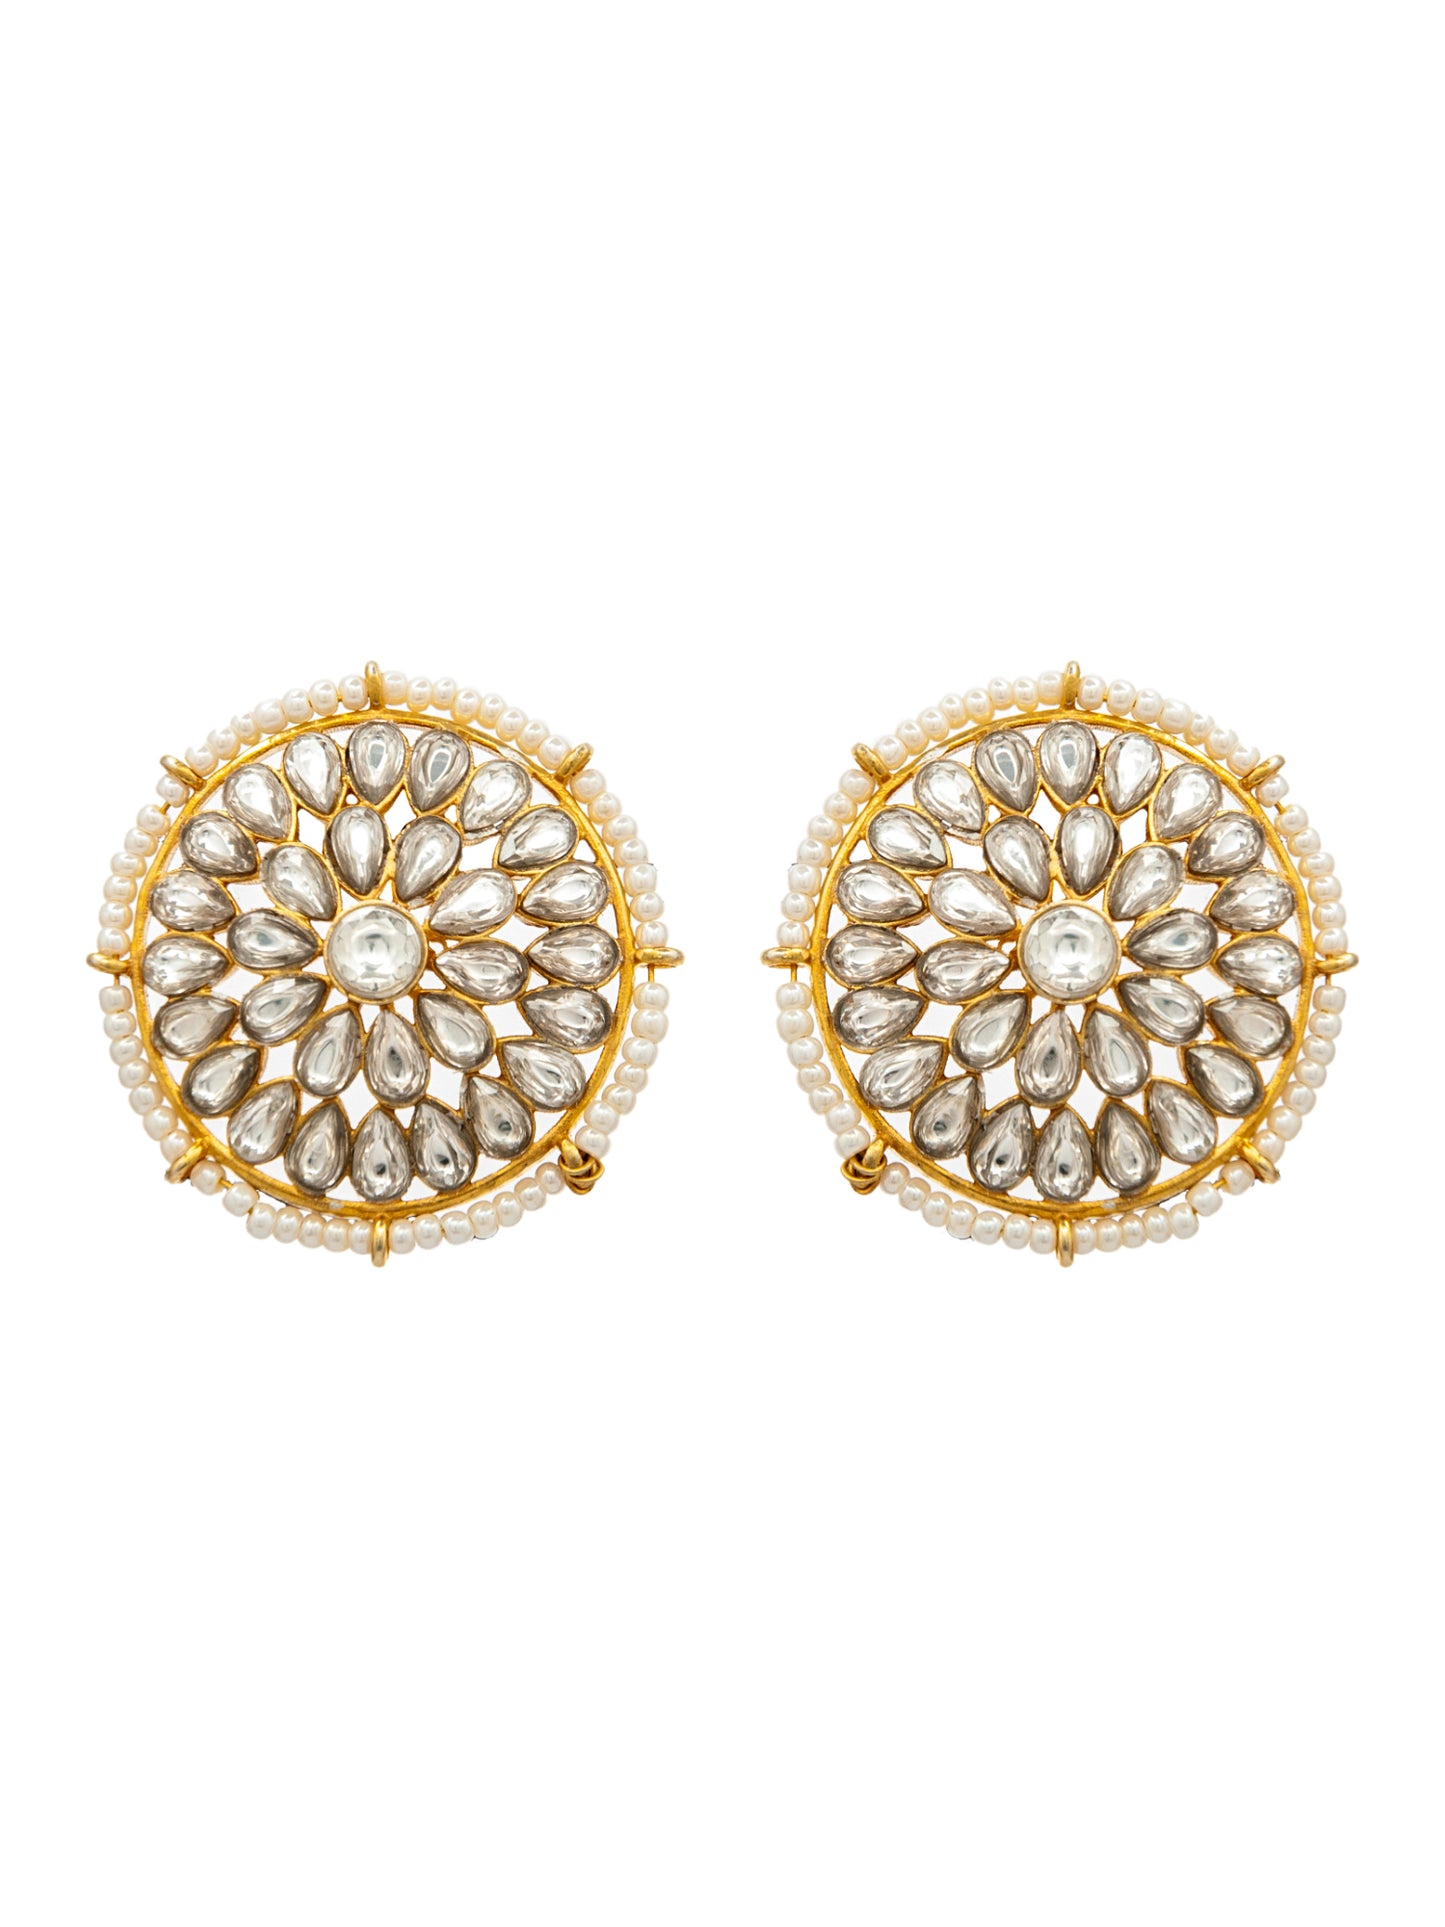 Pearl Radiance: 925 Sterling Silver Circle Earrings with Kundan and Pearl